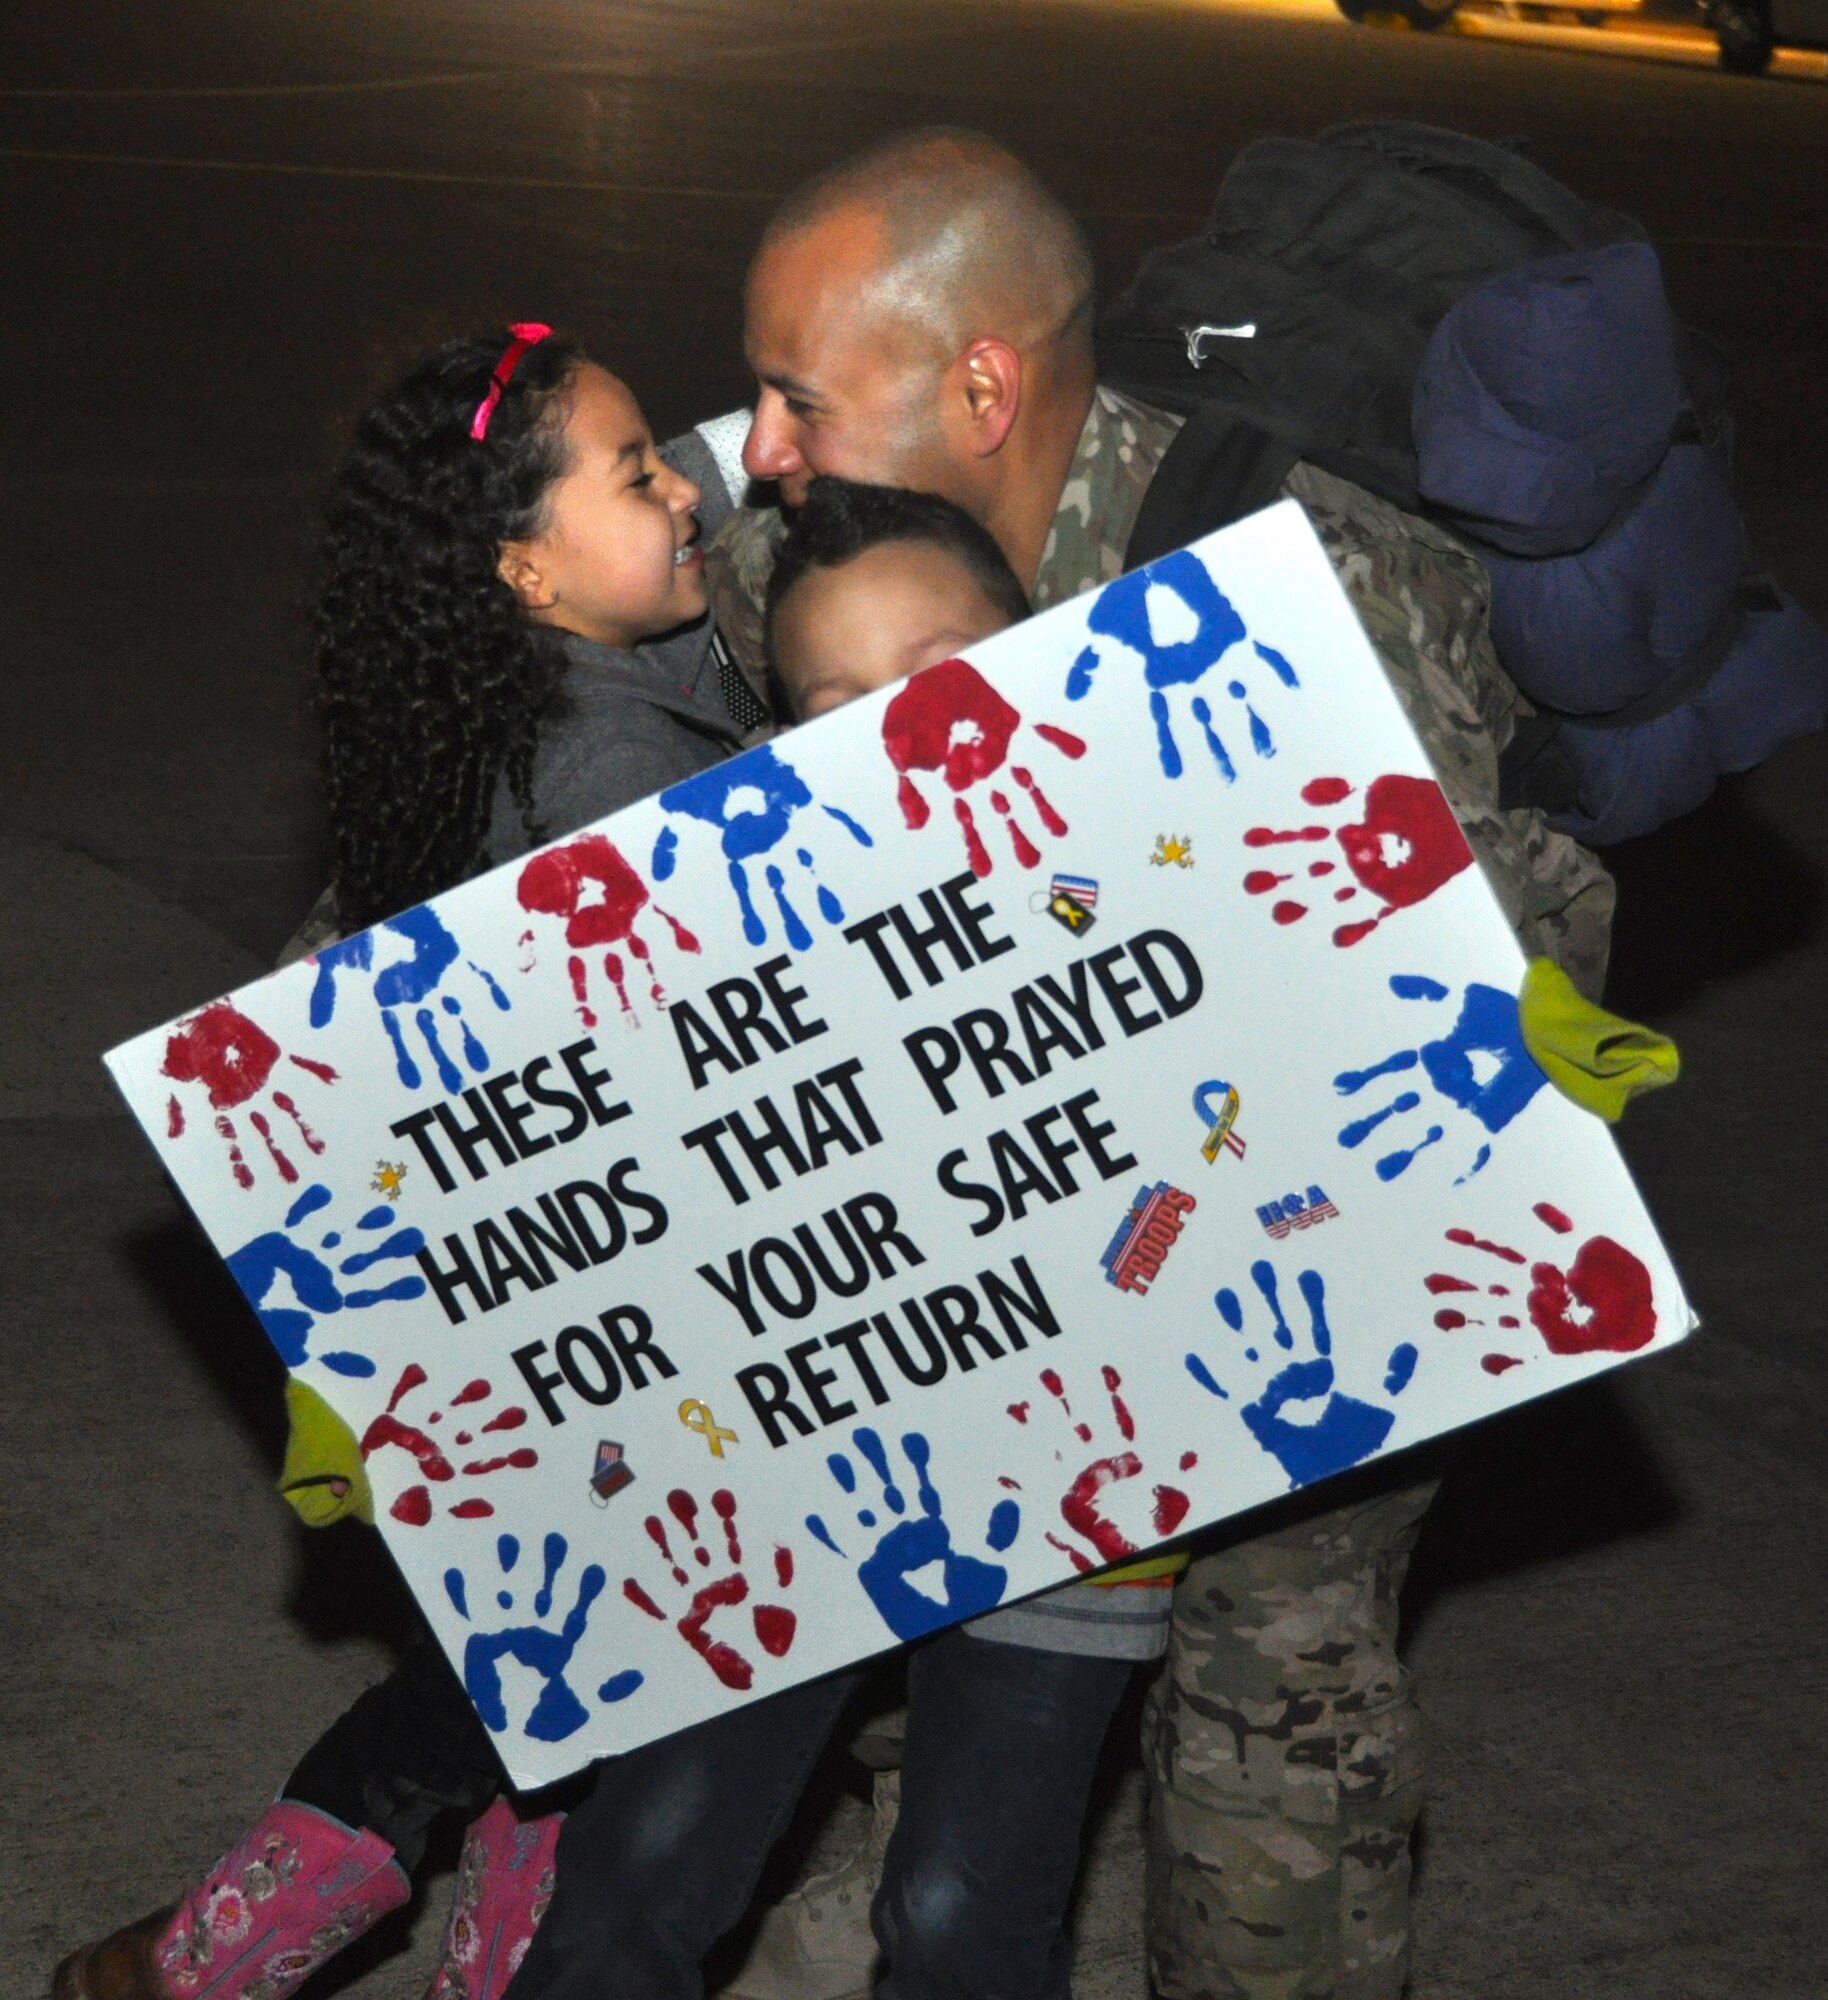 Reservists from the 301st Fighter Wing returned to chilly temperatures and a warm welcome home. Family members and friends displayed signs anticipating their loved-one's arrival from Afghanistan where they were deployed in support of Operation Enduring Freedom. (U.S. Air Force photo/MSgt Josh Woods)